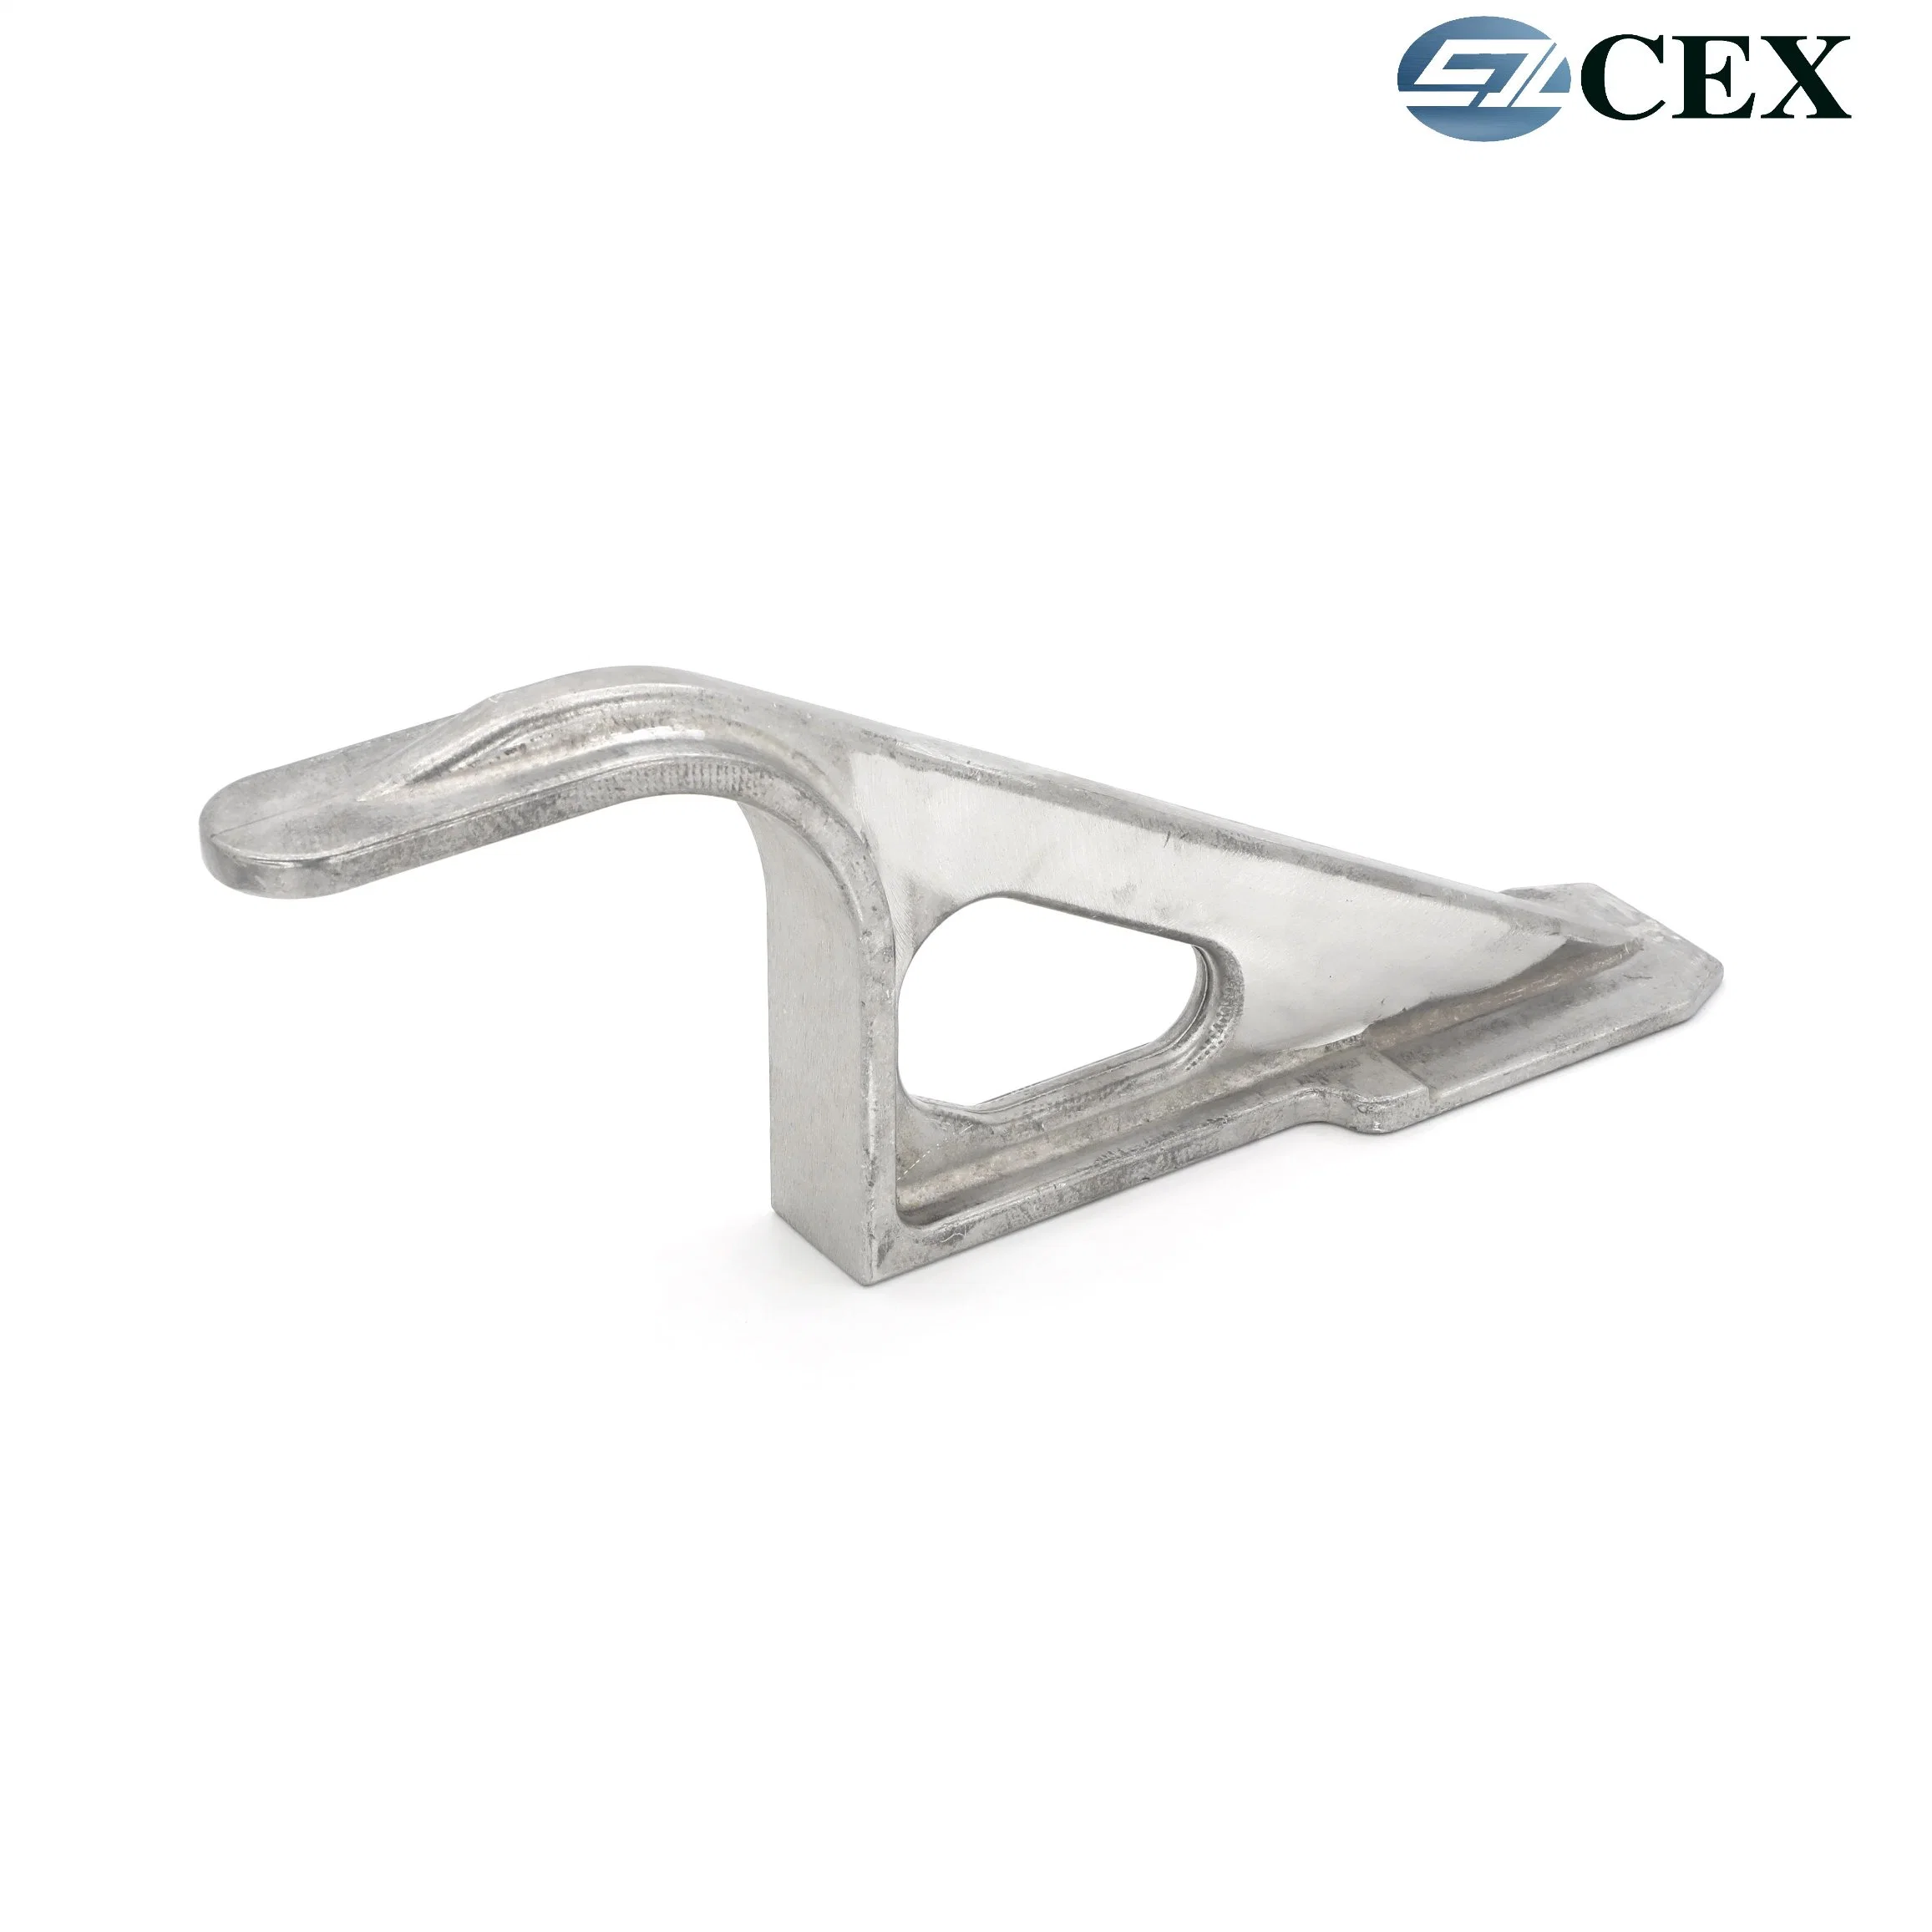 OEM Aluminum Alloy Die Casting Scooter Body Parts for Electric Scooter/Electric Motorcycle/Electric Bike Components